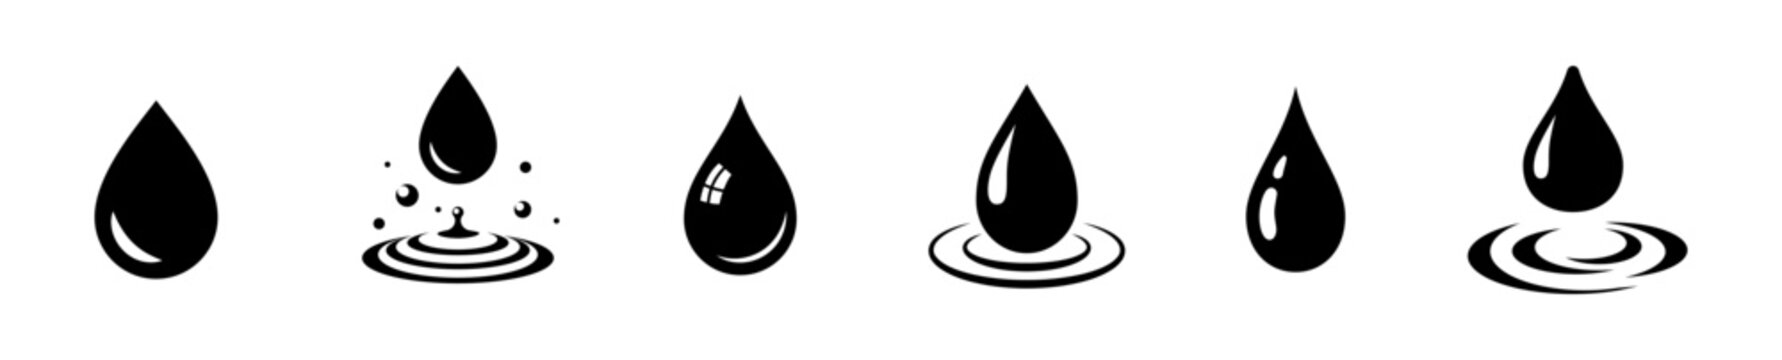 Wall Mural -  - Water drop icon set. Flat droplet logo shapes collection